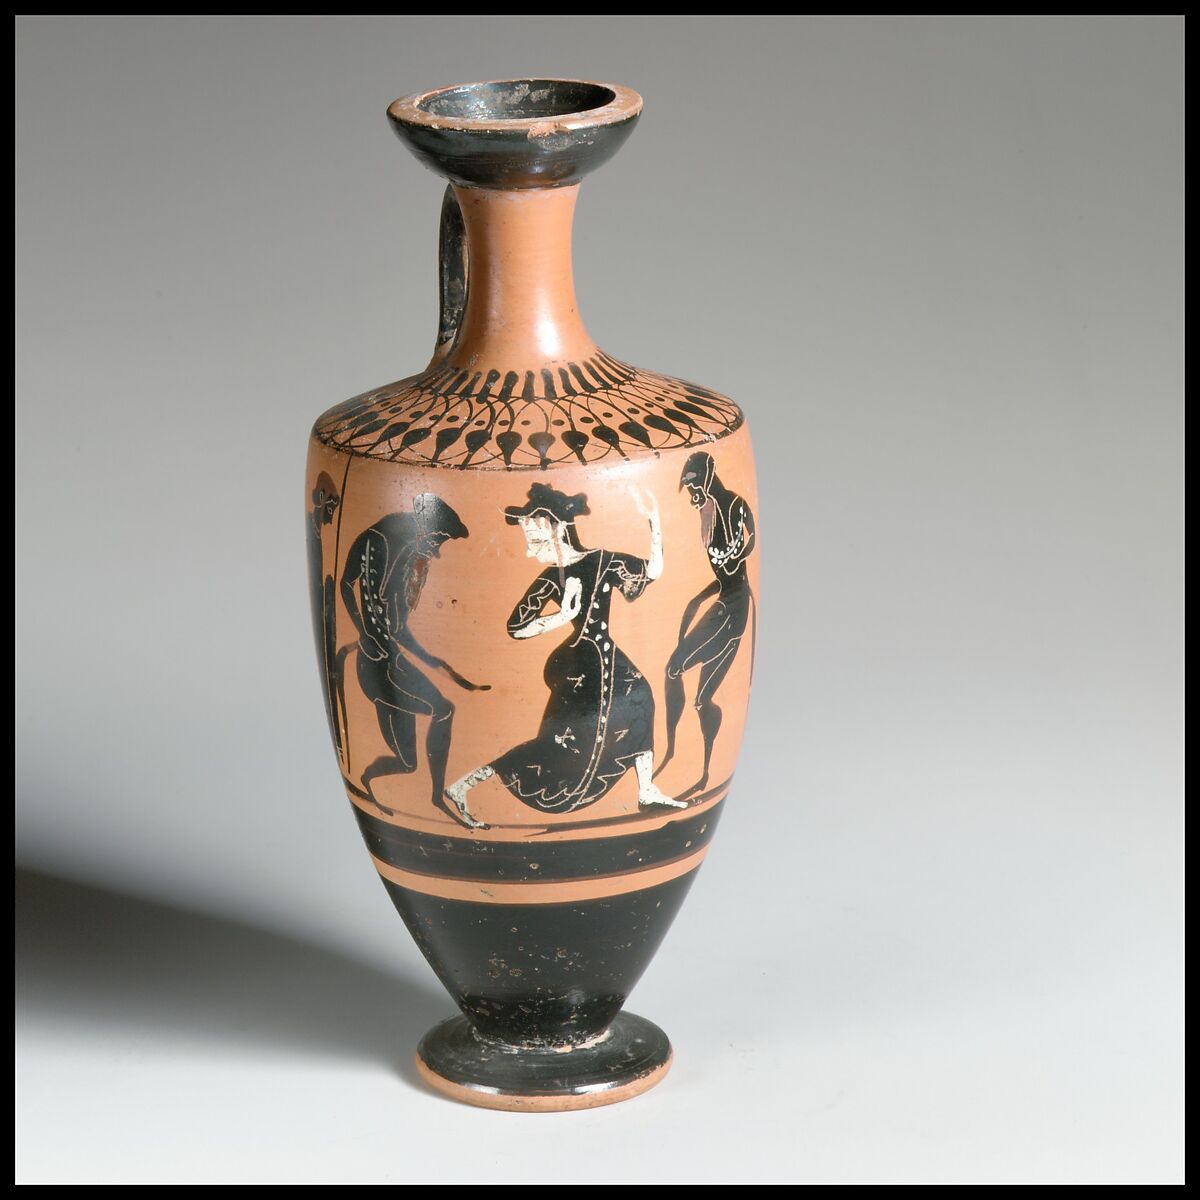 Lekythos, Attributed to the Class of Athens 581, Terracotta, Greek, Attic 